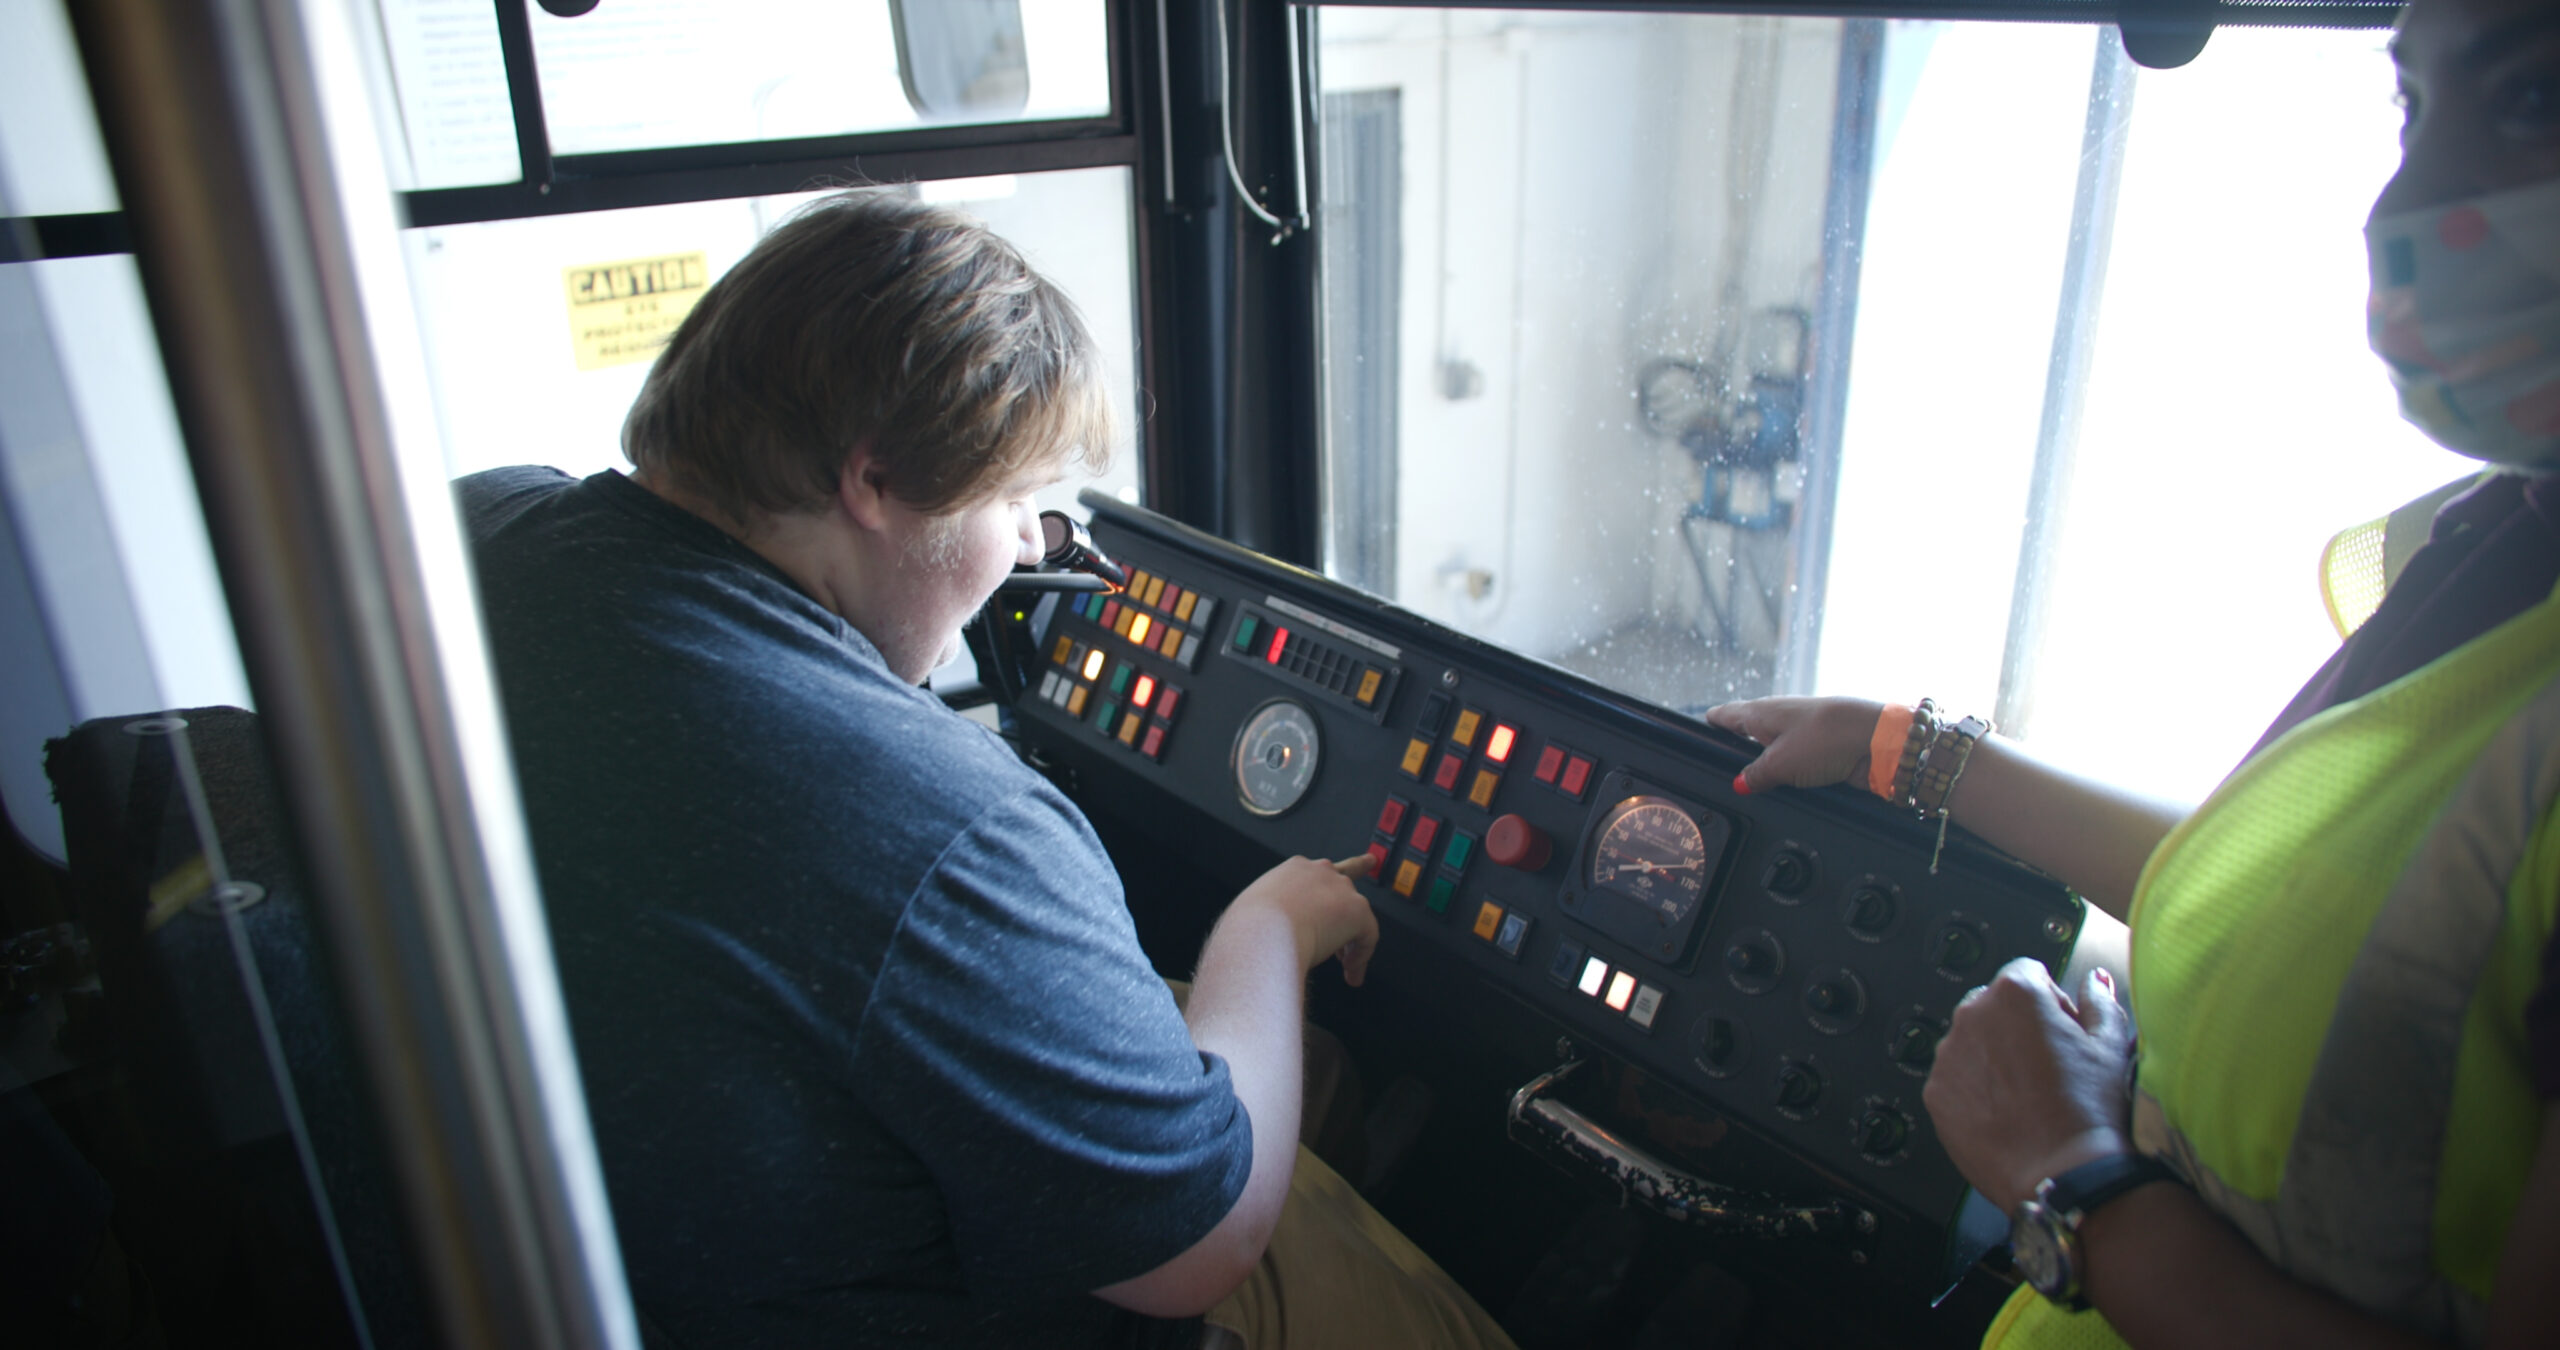 A student presses buttons at the control panel of a Metro train